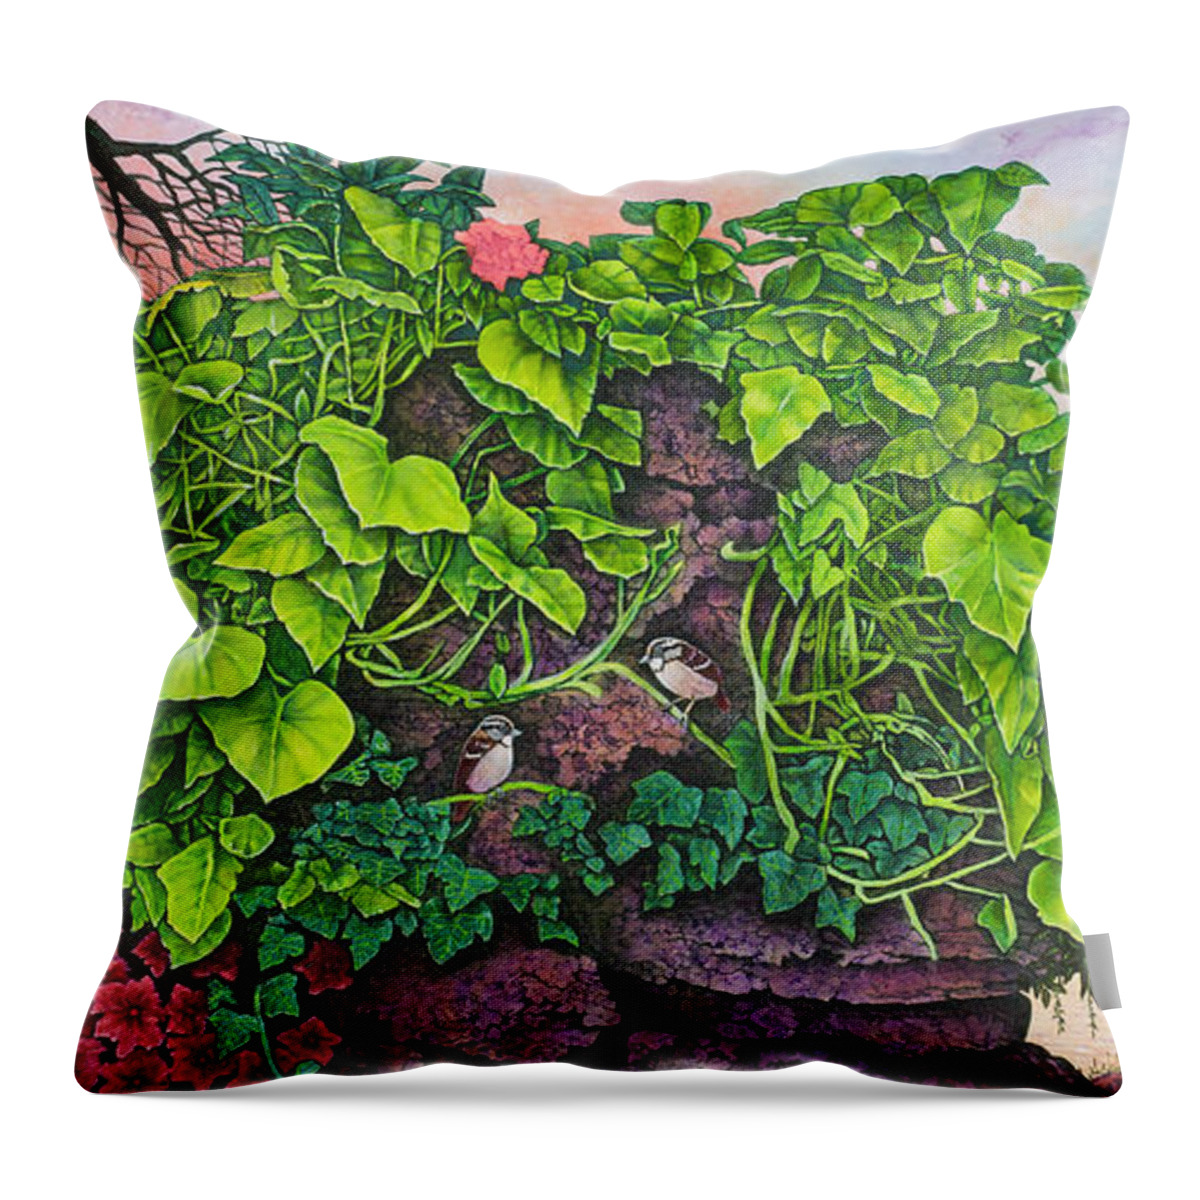 Flower Throw Pillow featuring the painting Flower Garden VIII by Michael Frank